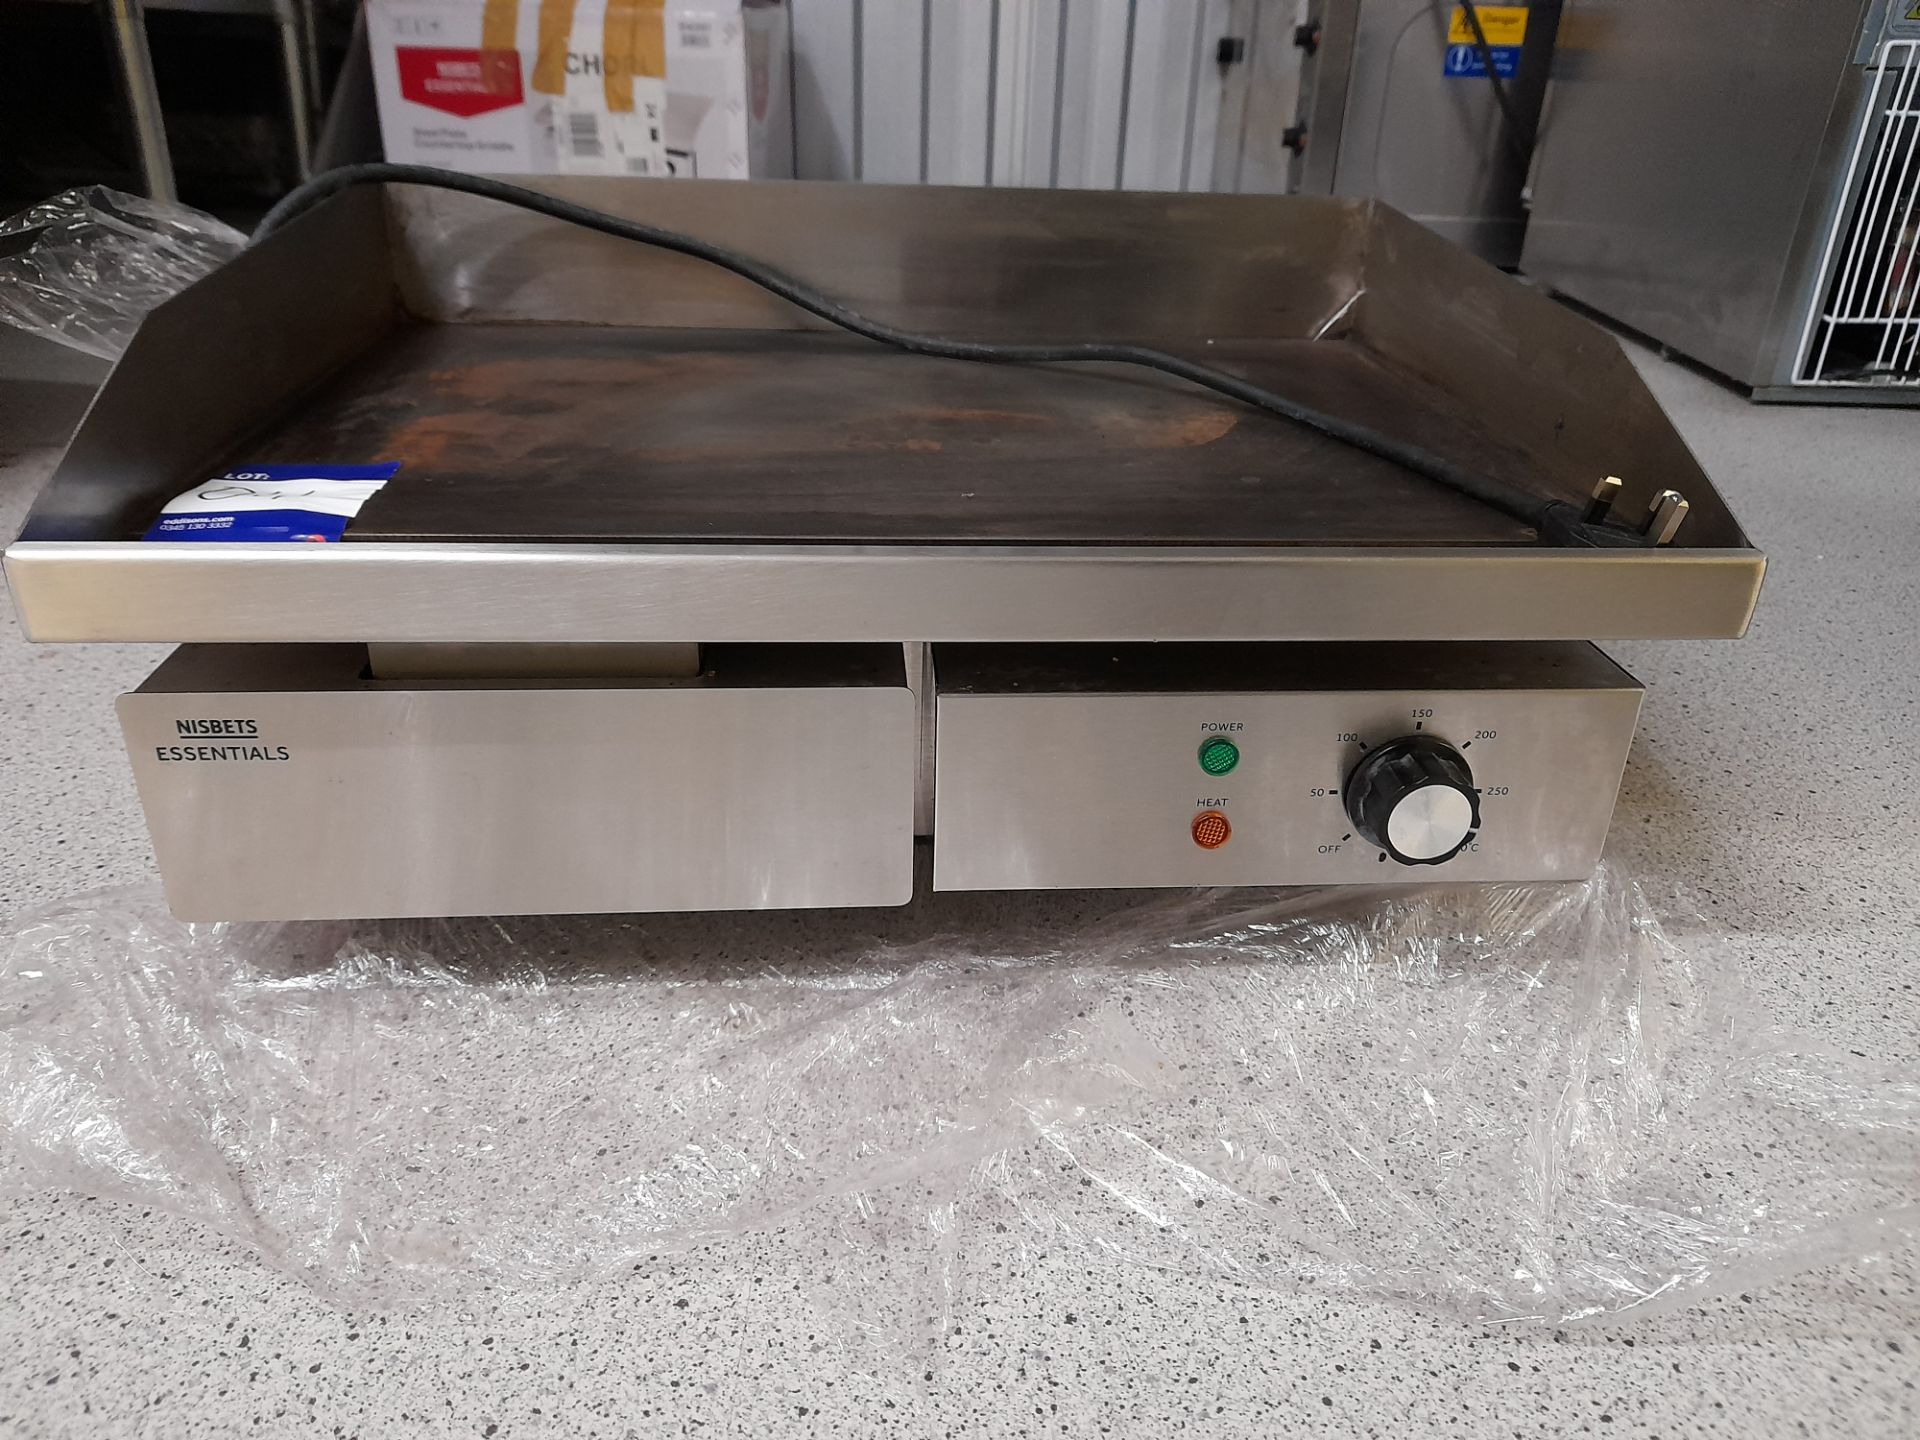 Nisbets Essentials DA397 Counter-top griddle, Serial Number 397202205000801 – Located Manchester - Image 2 of 3